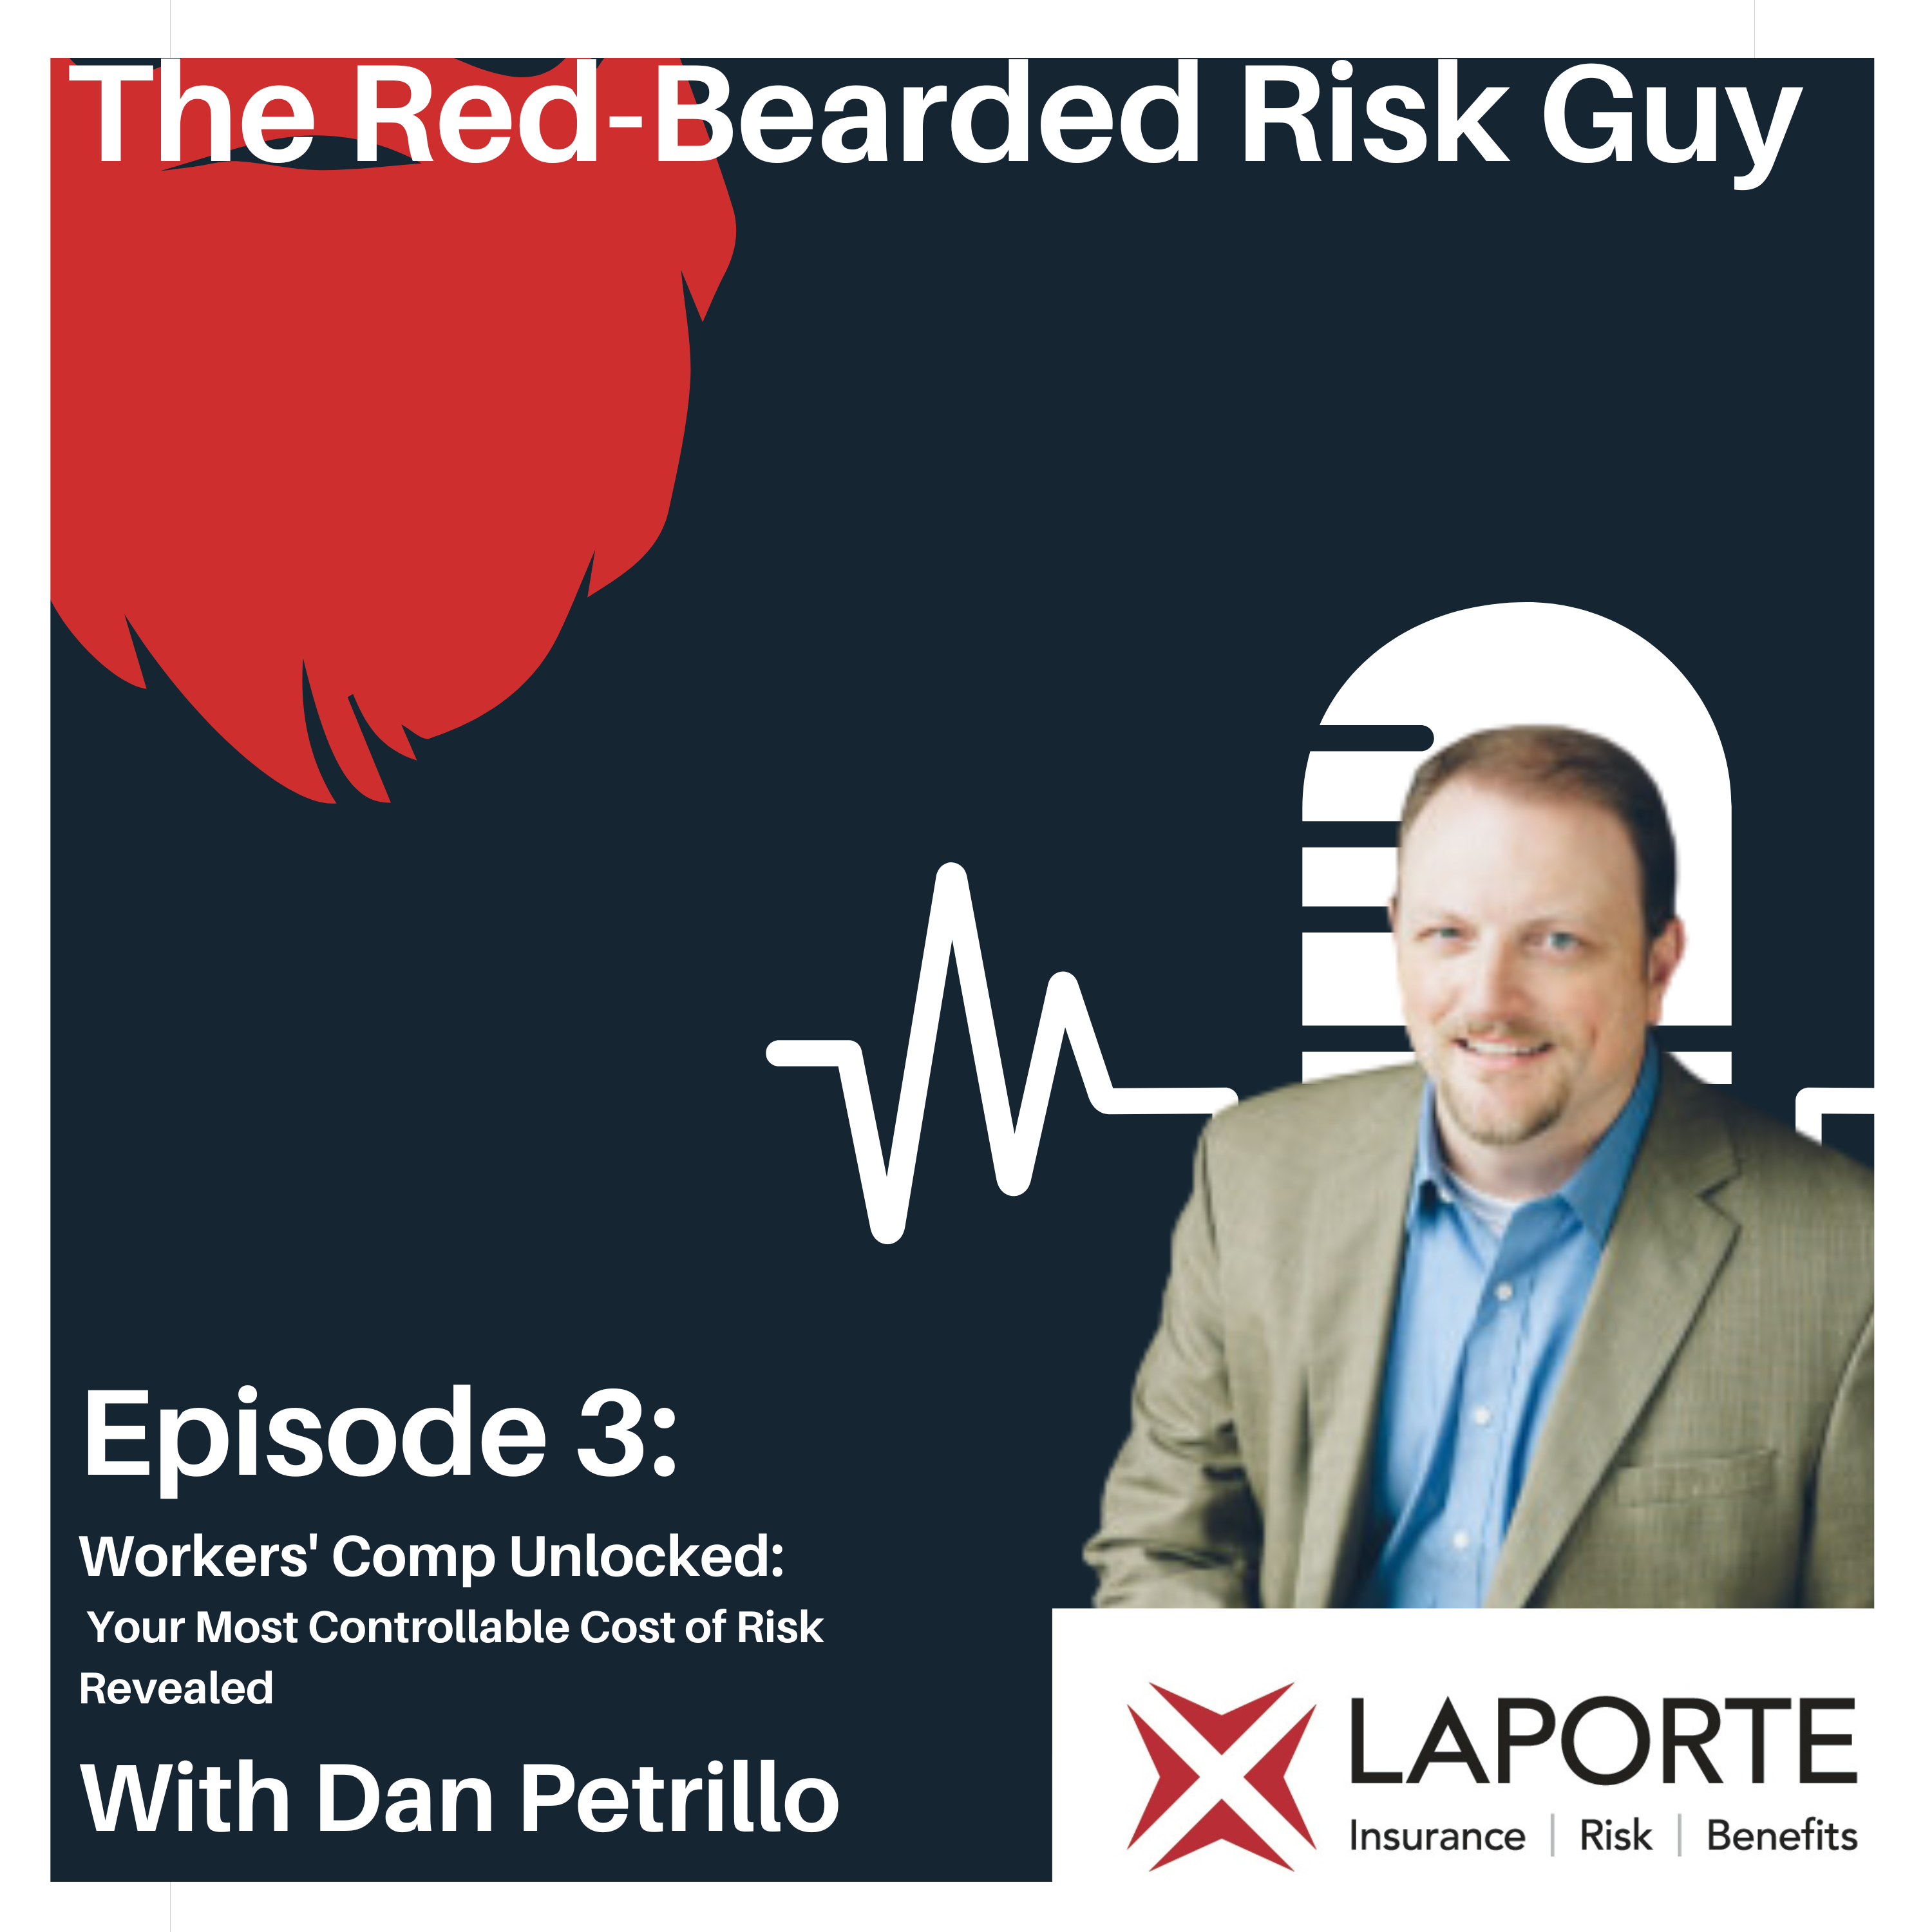 Dan Petrillo Expert on workers' comp and experience rating mod, ERM or EMR